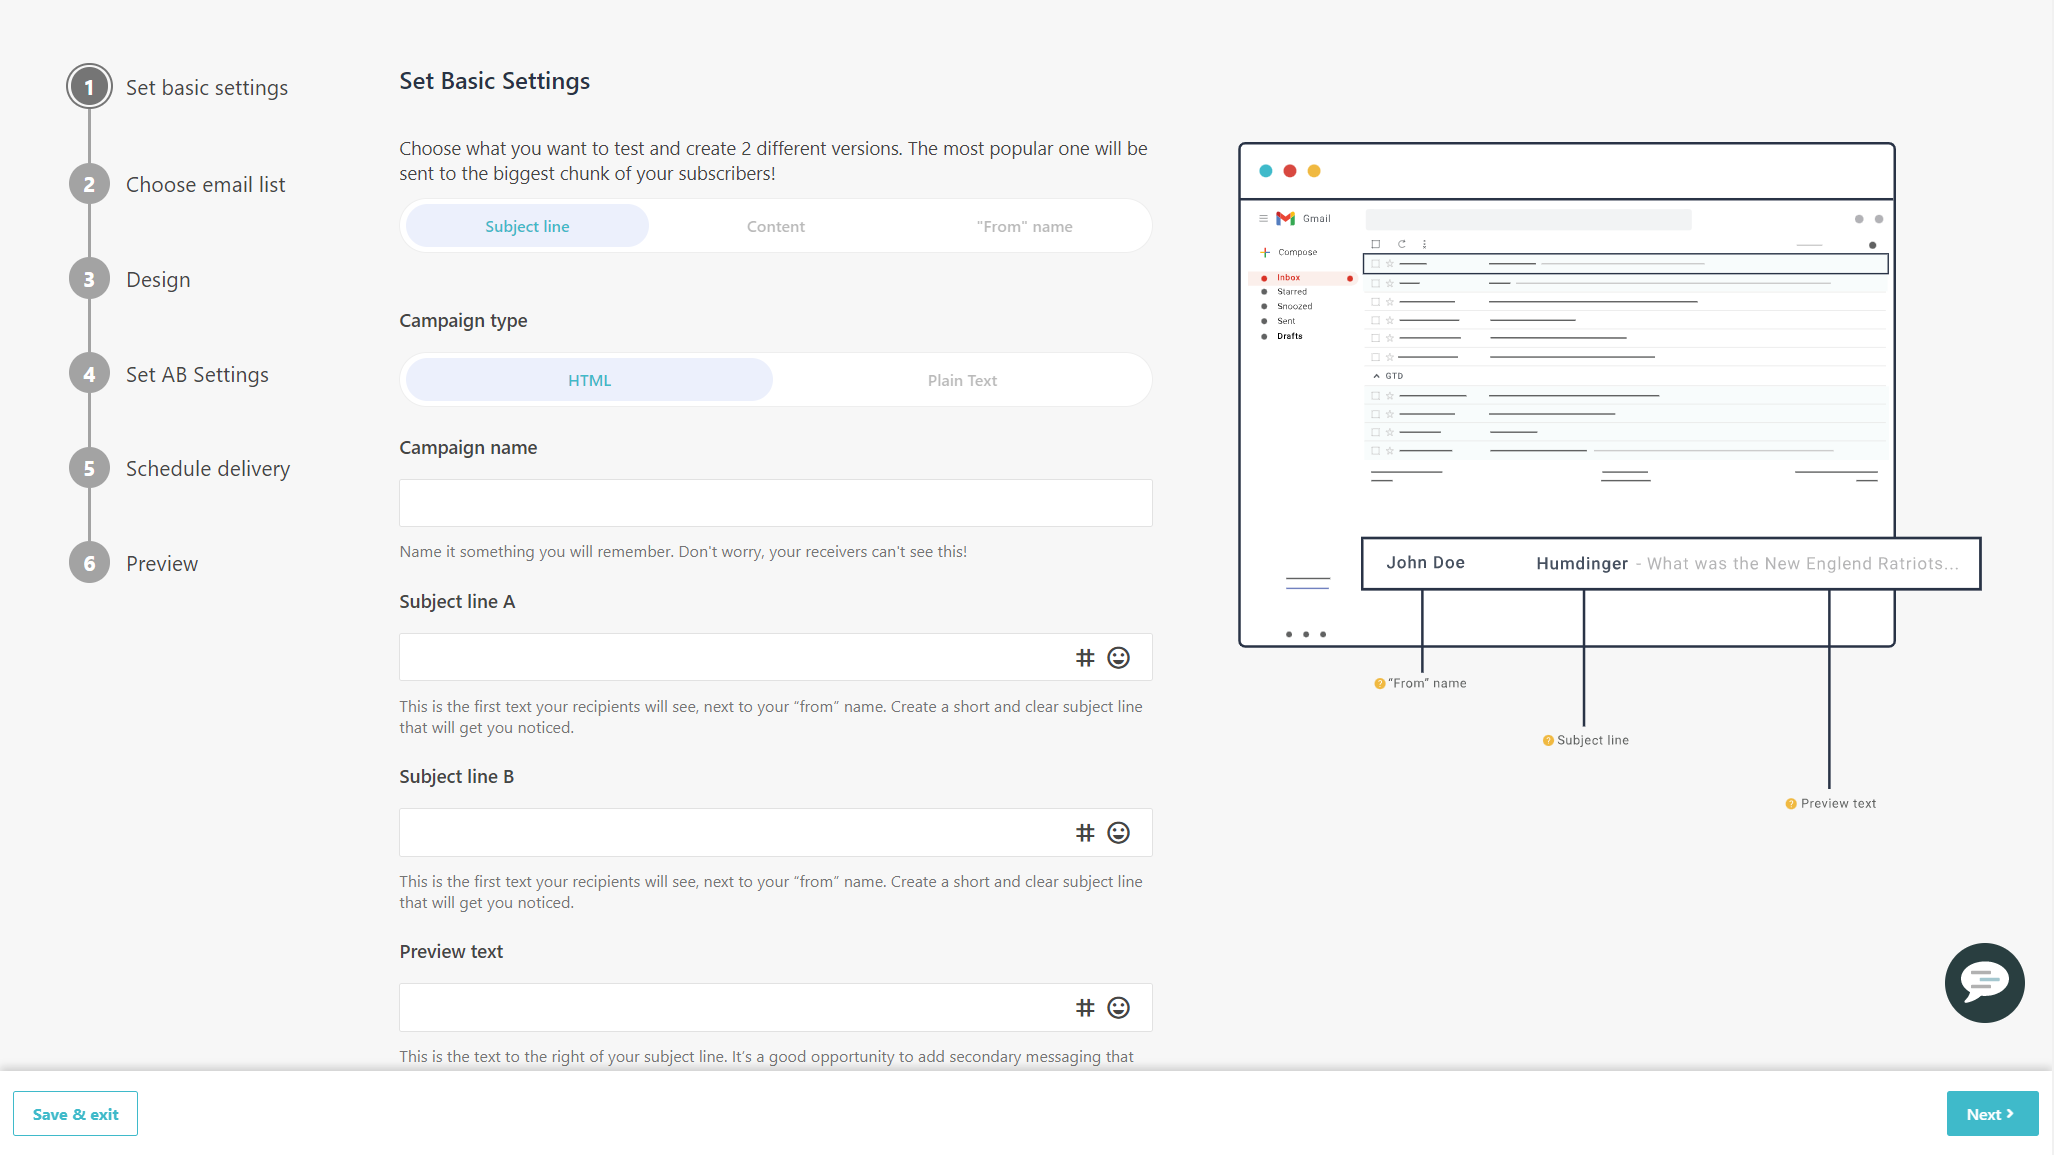 Set Basic Settings page for an A/B testing campaign